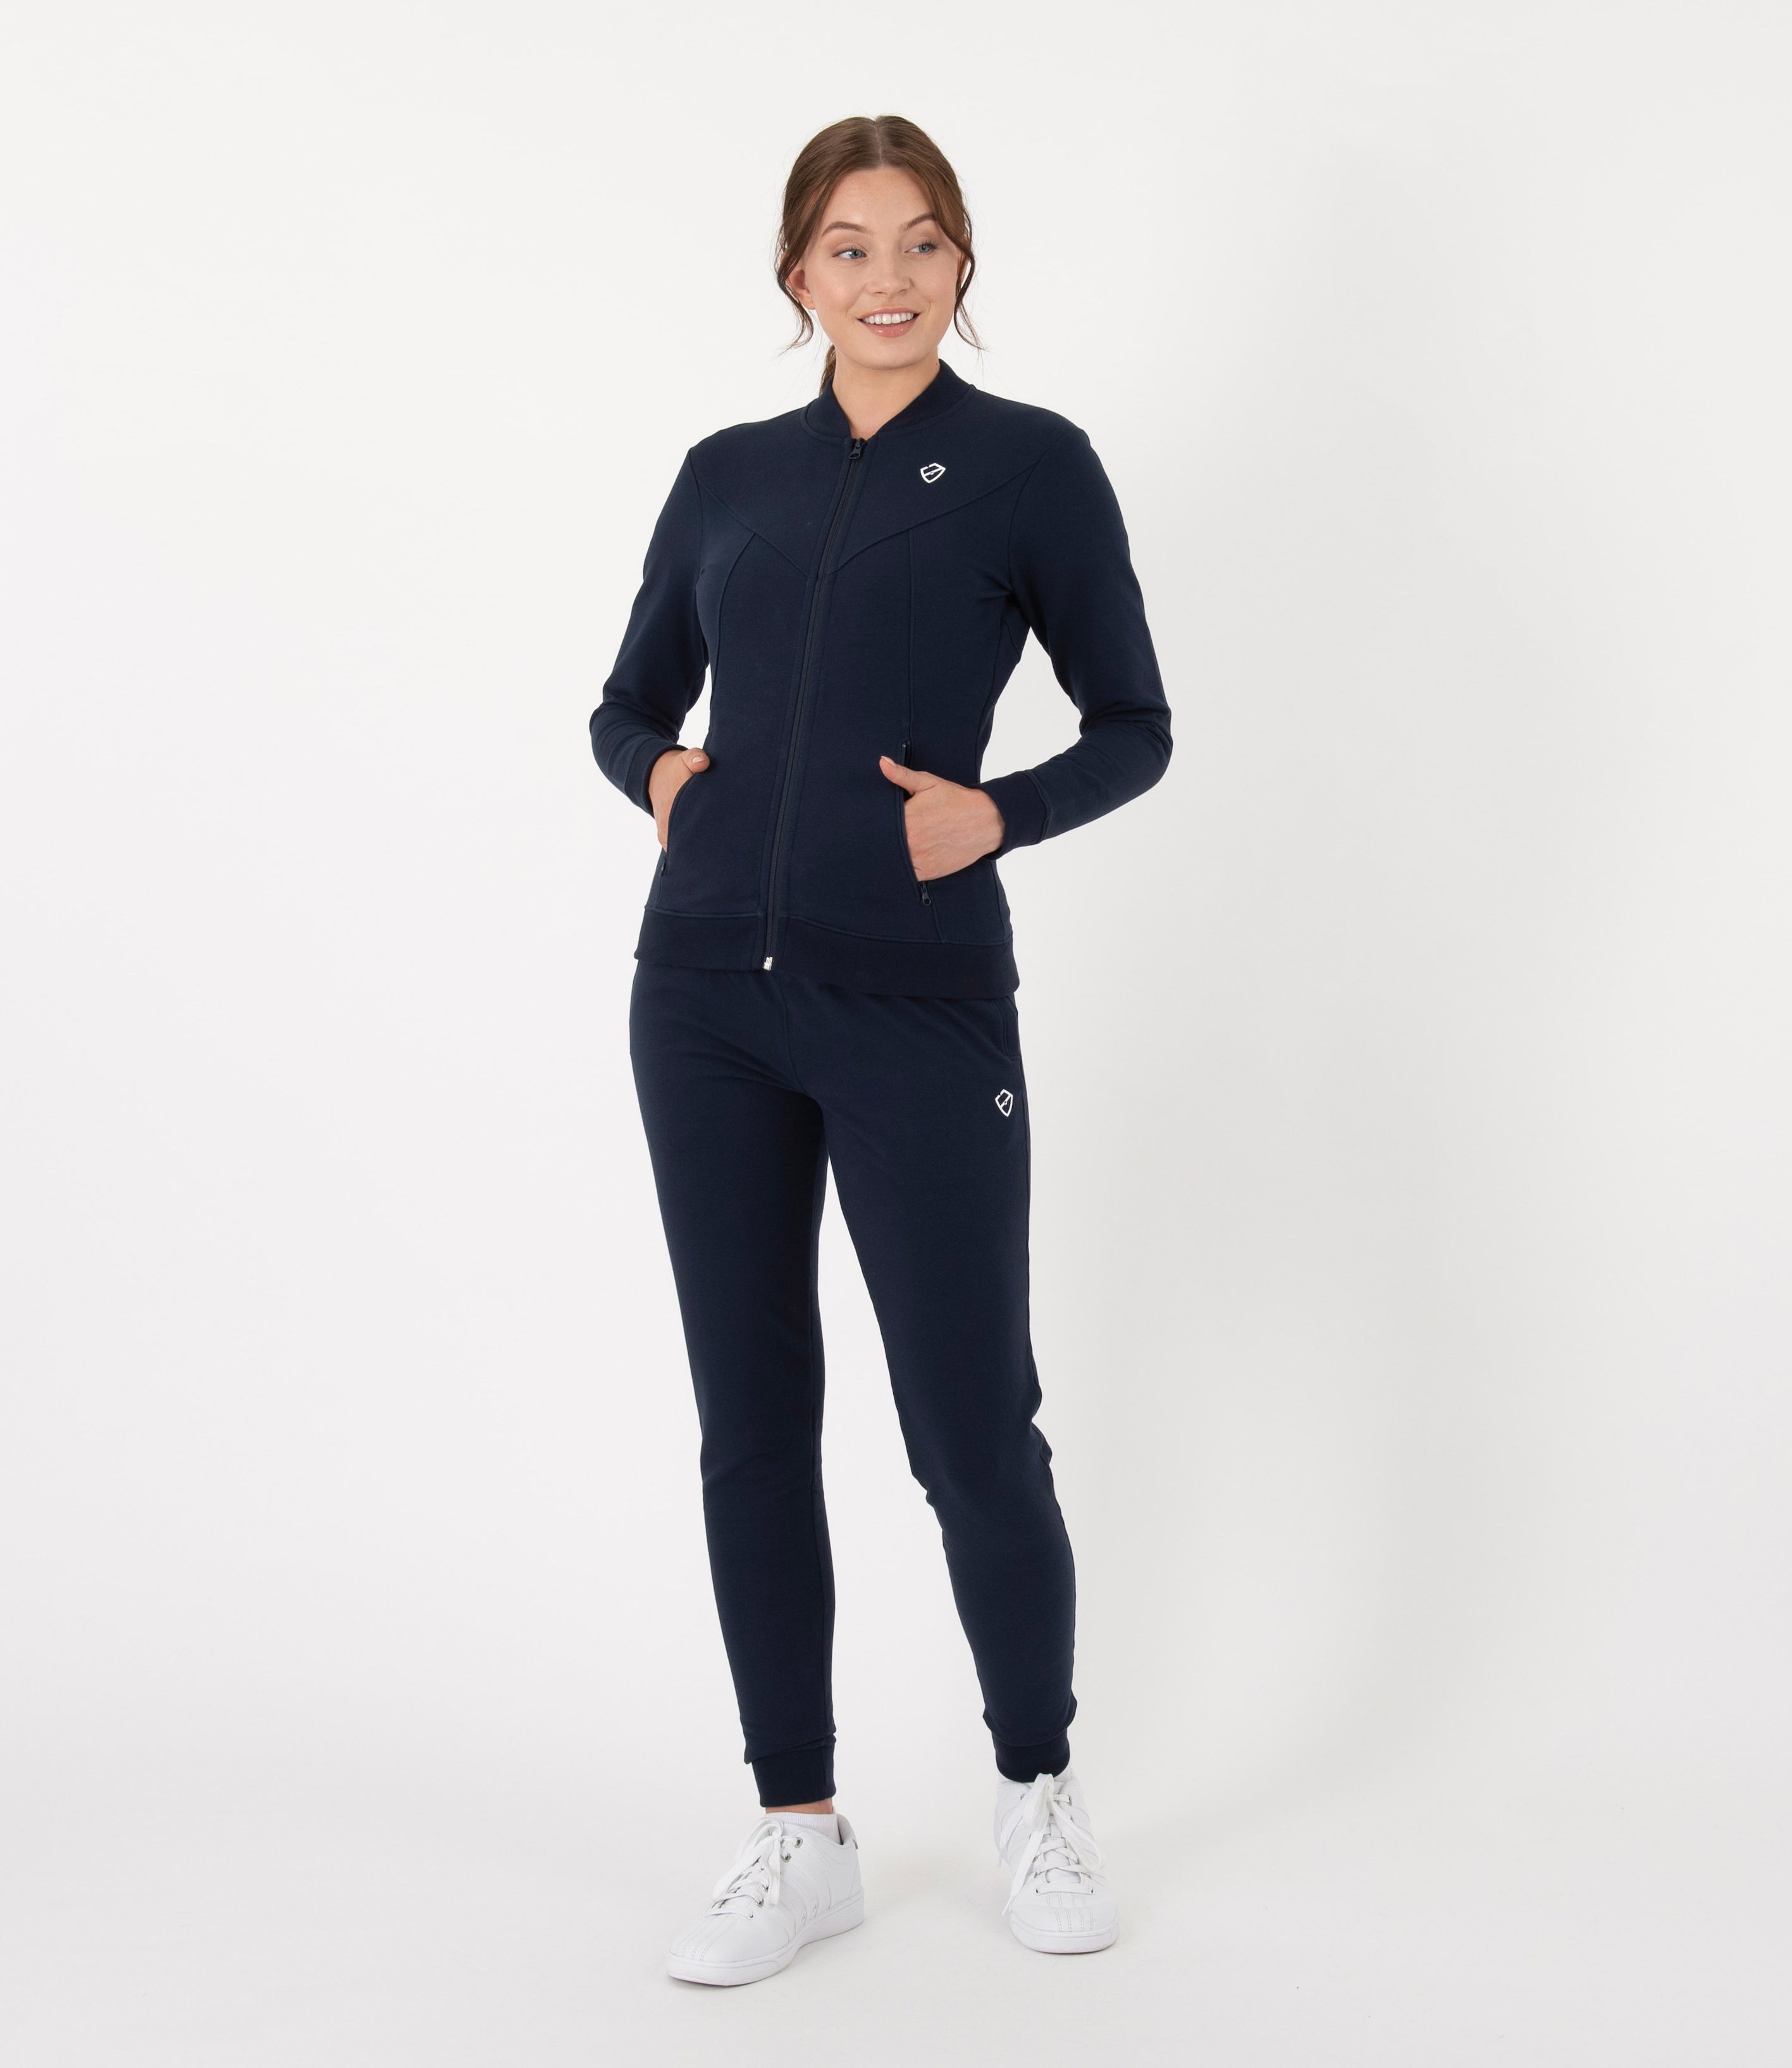 Beatrice Cotton Fitted Jacket - Navy and White | PlayBrave Sportswear